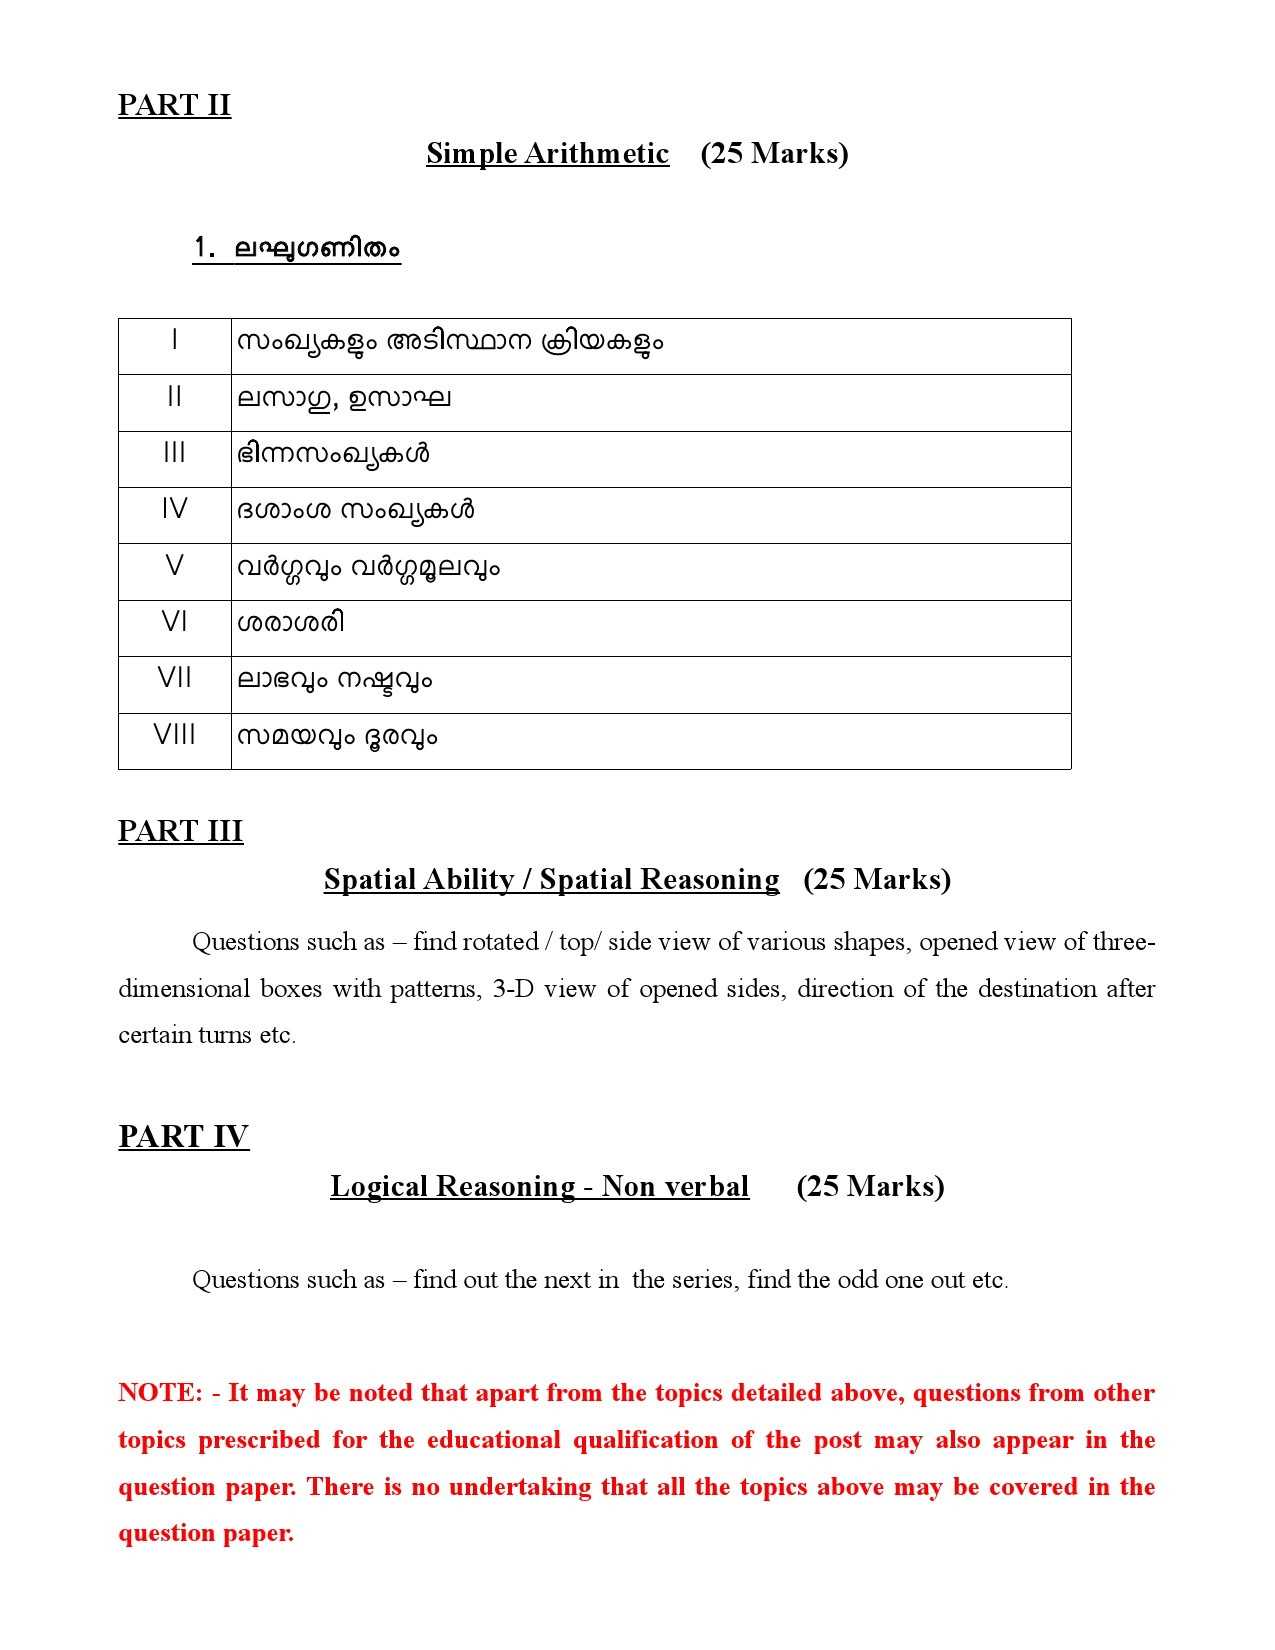 Syllabus For The Post Of Police Constable In Police - Notification Image 2